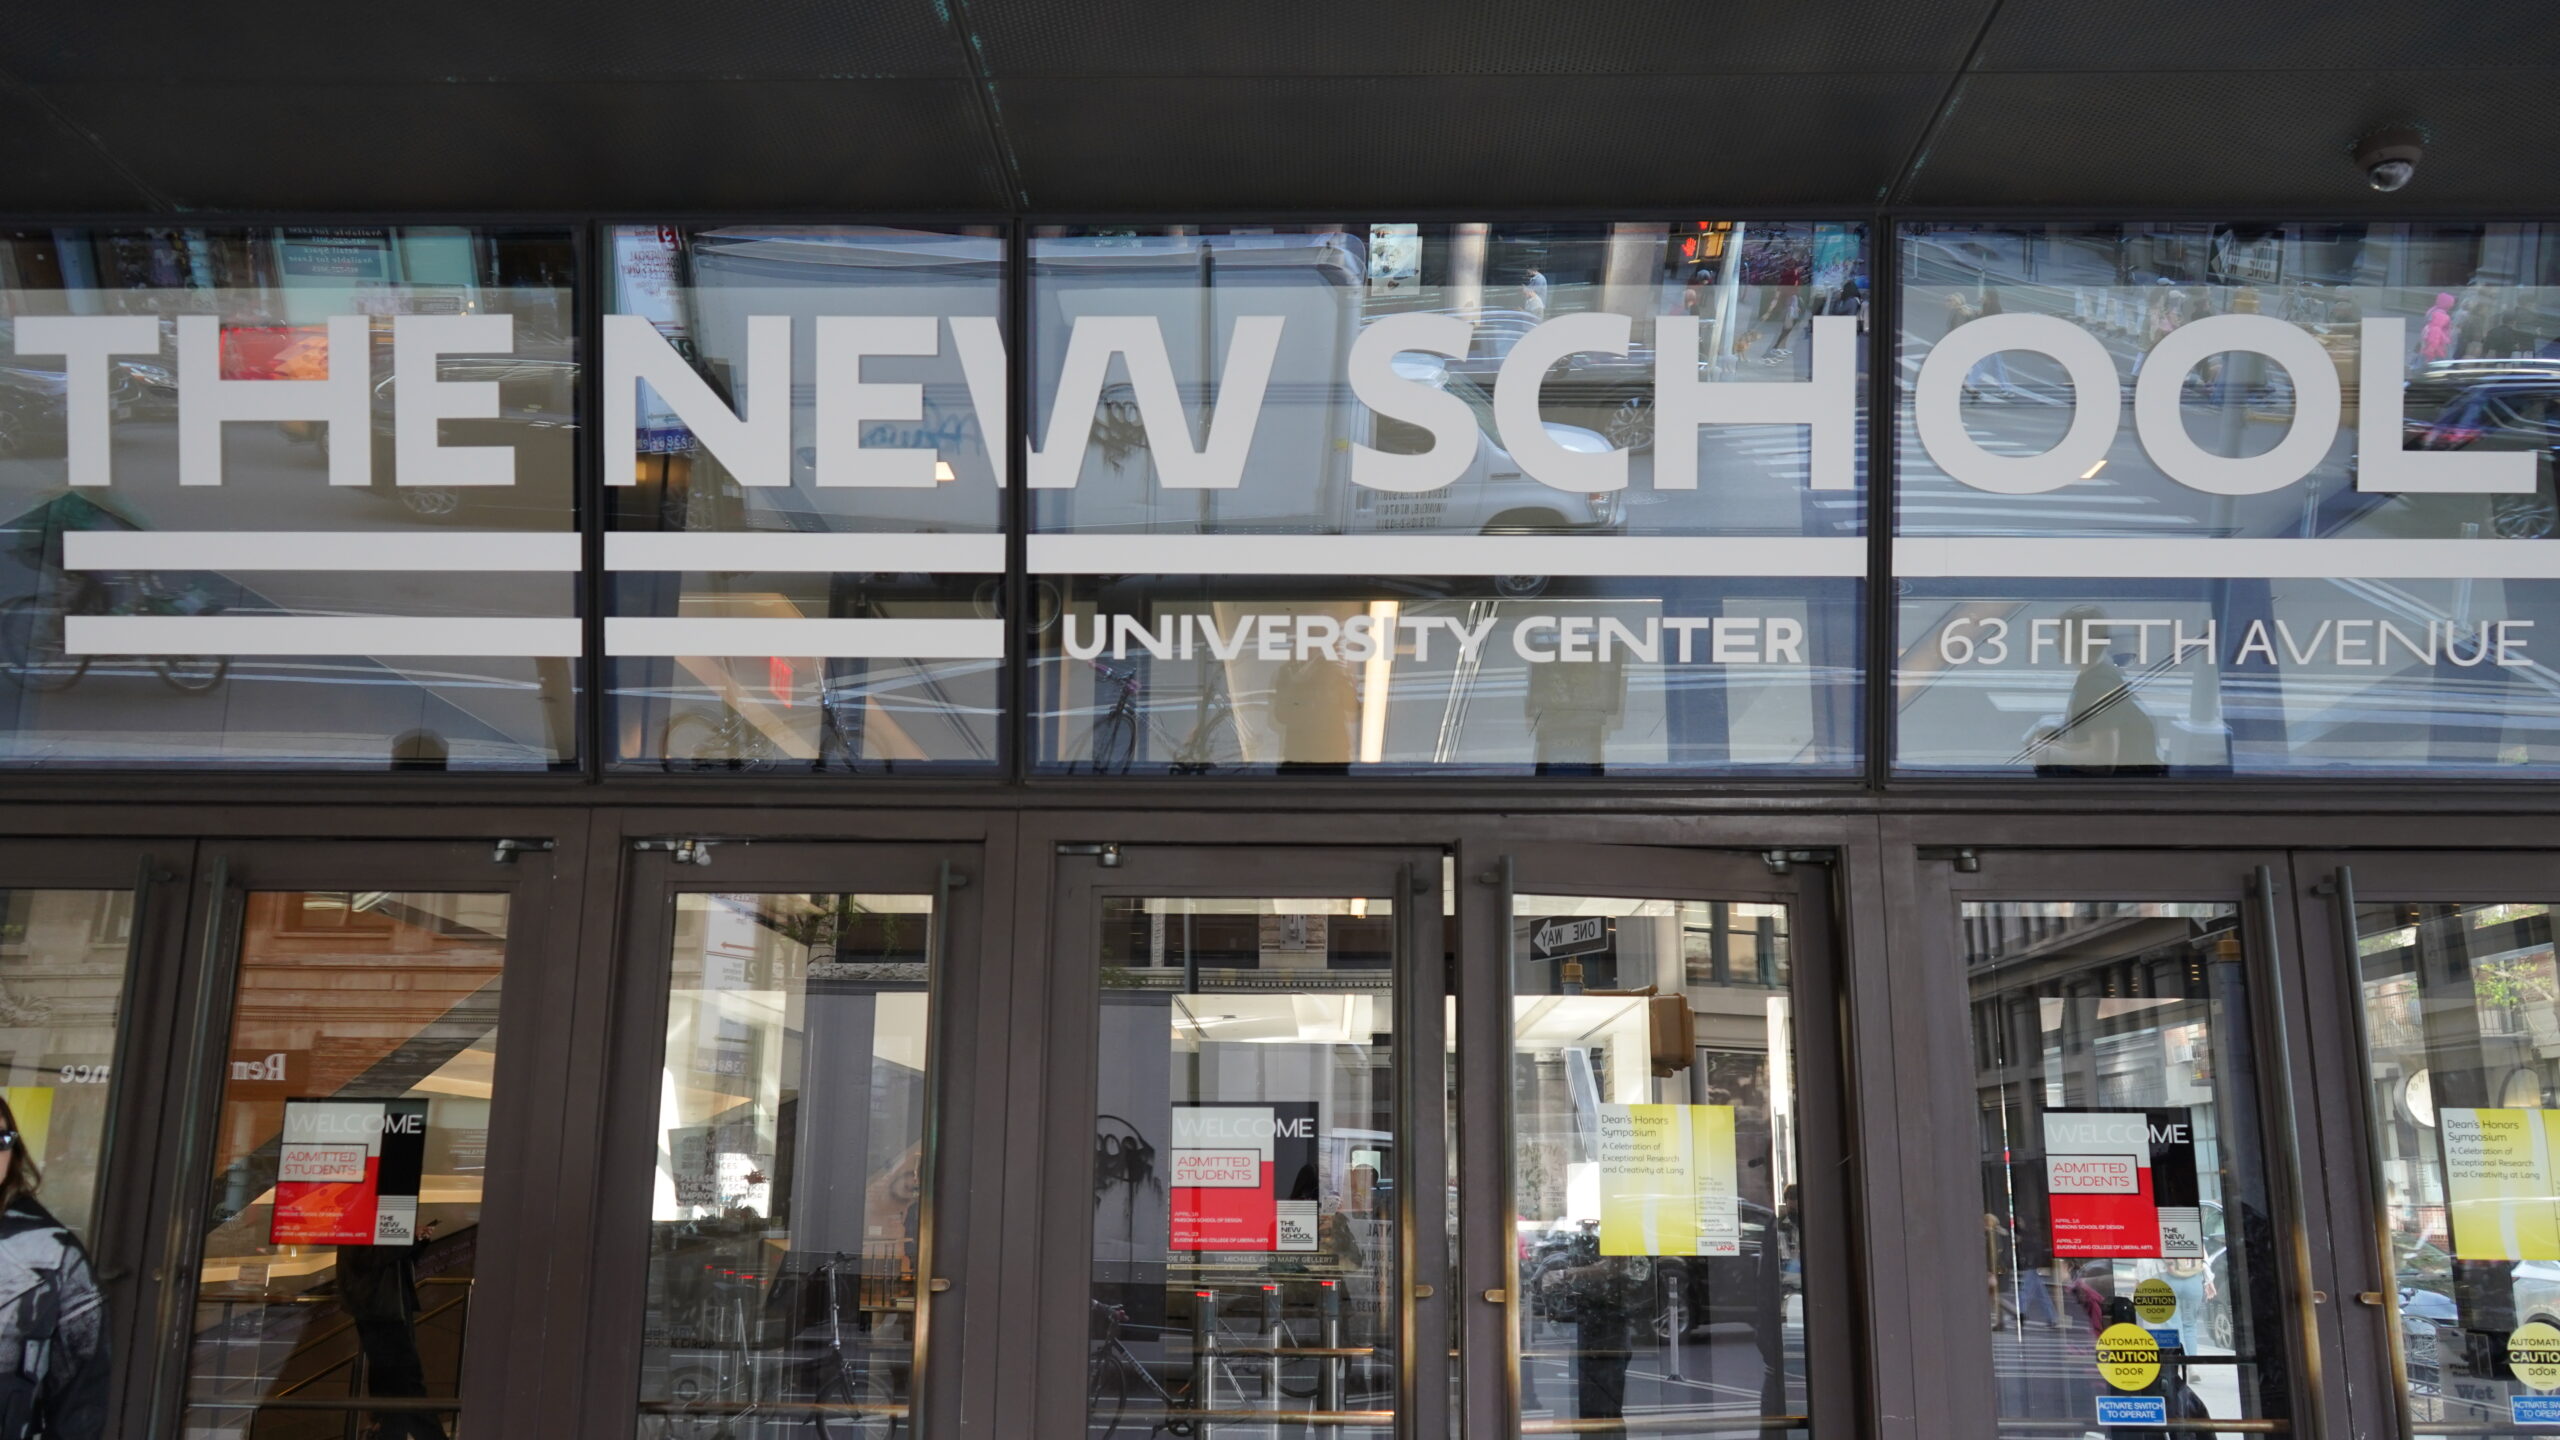 Image of the front doors to the university center. Above the doors it says "the New School"